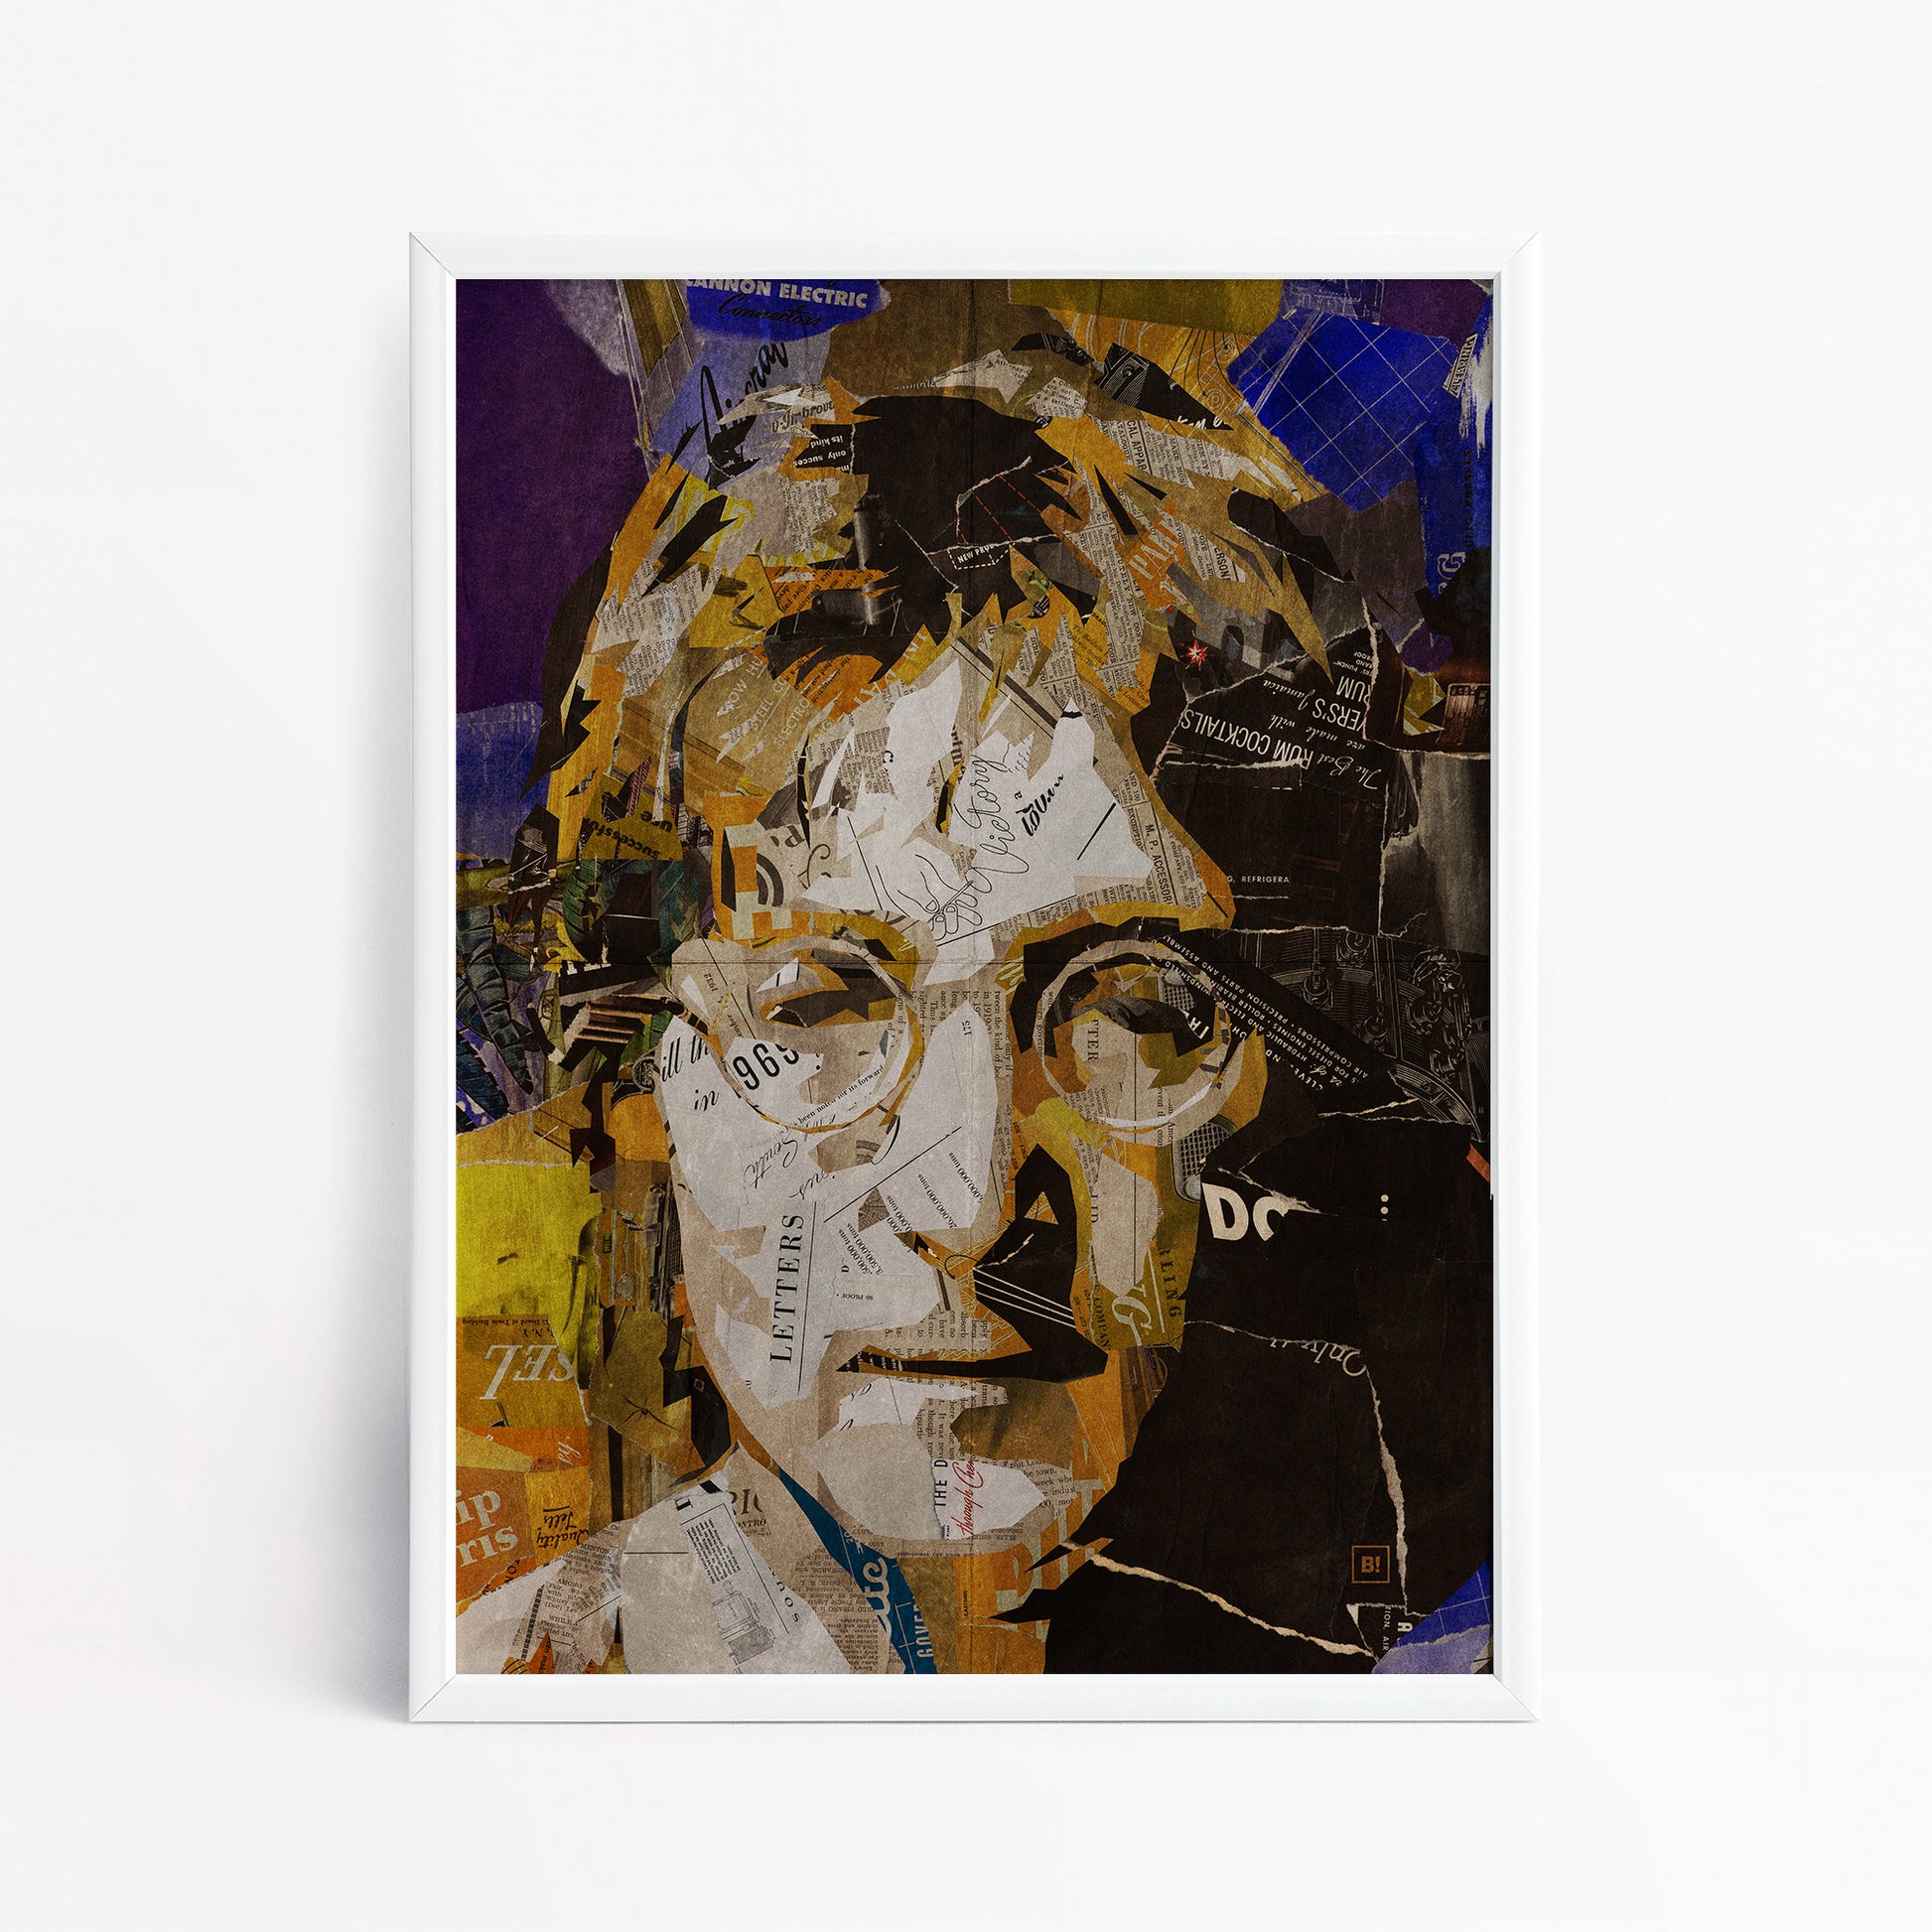 Be inspired by our iconic collage portrait art print of John Lennon. This artwork has been printed using the giclée process on archival acid-free paper and is presented in a sleek white frame, showcasing its timeless beauty in every detail.